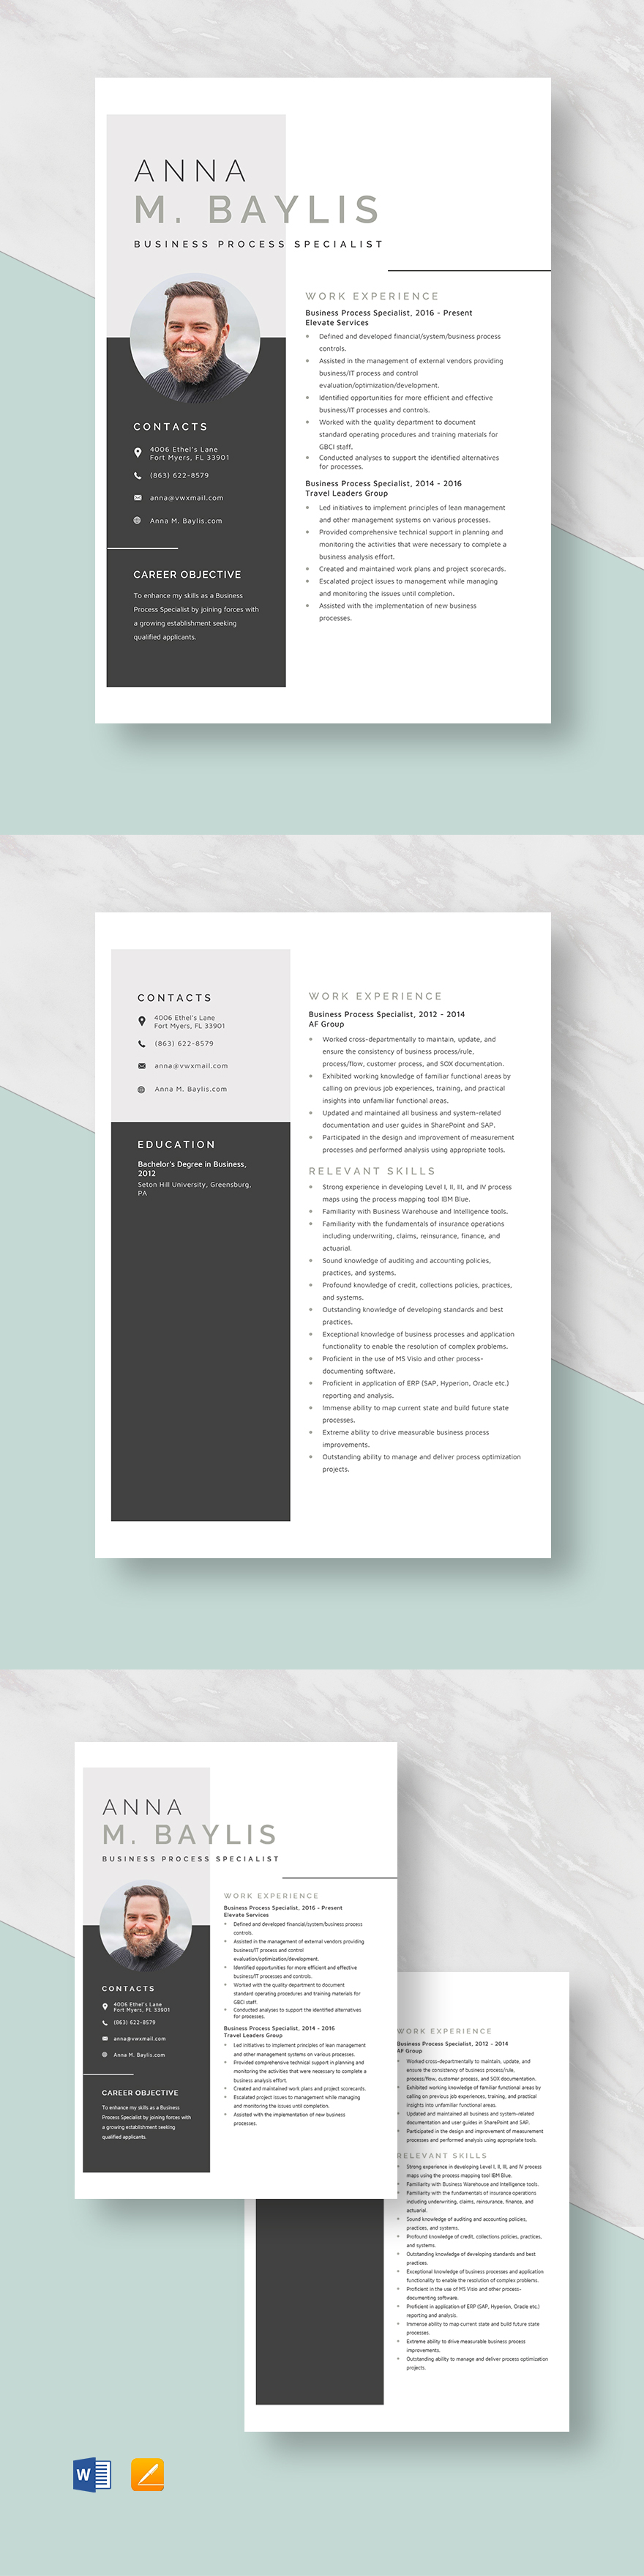 Free Business Process Specialist Resume Template